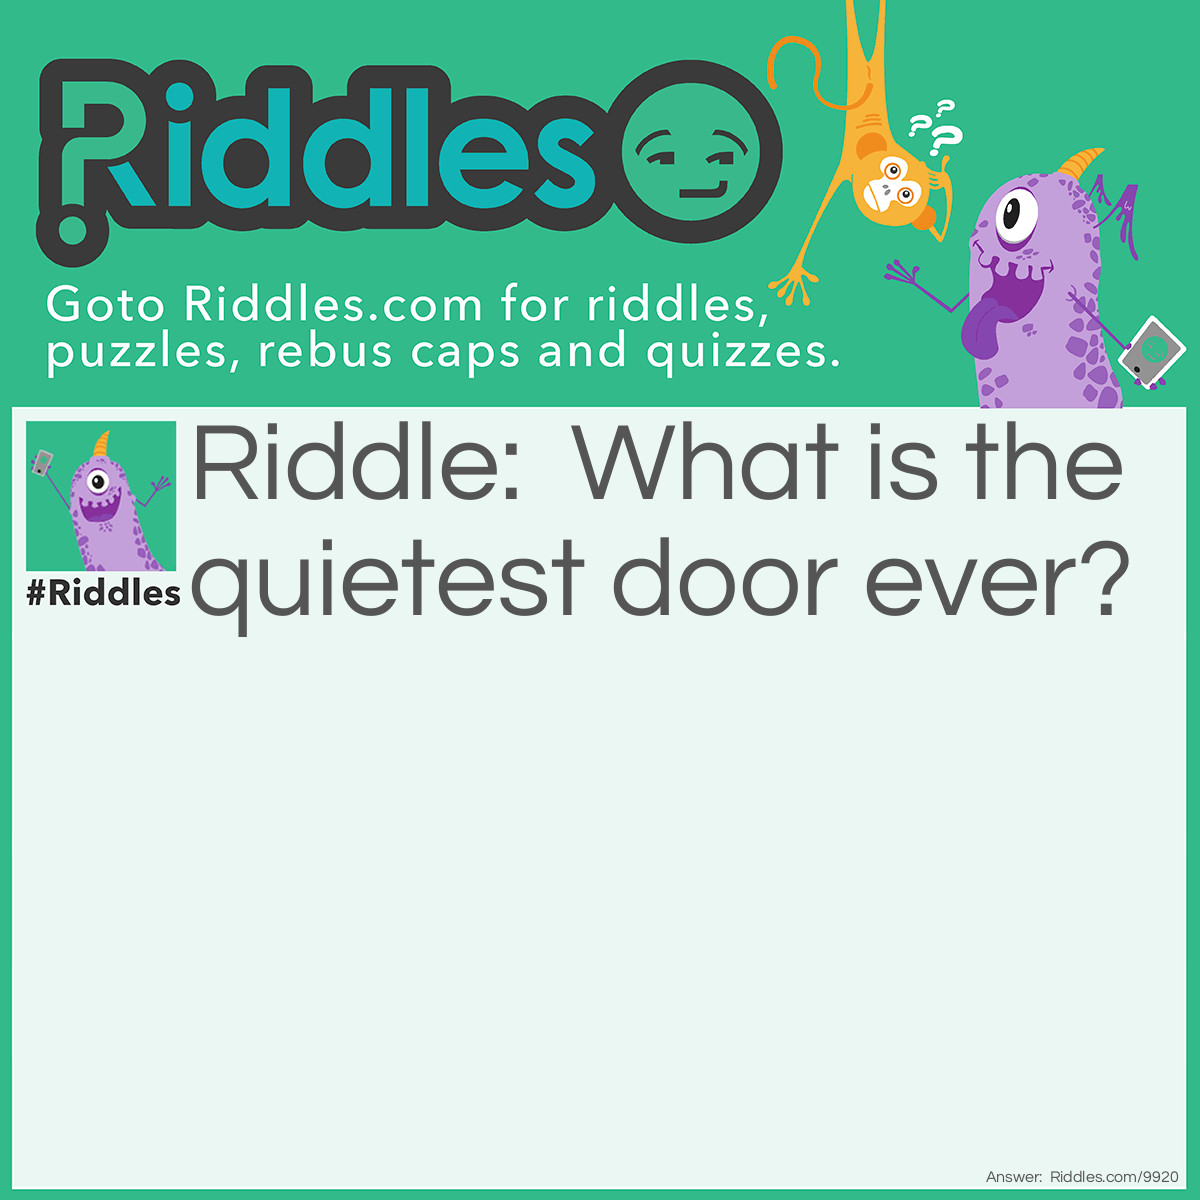 Riddle: What is the quietest door ever? Answer: Your eyelid.